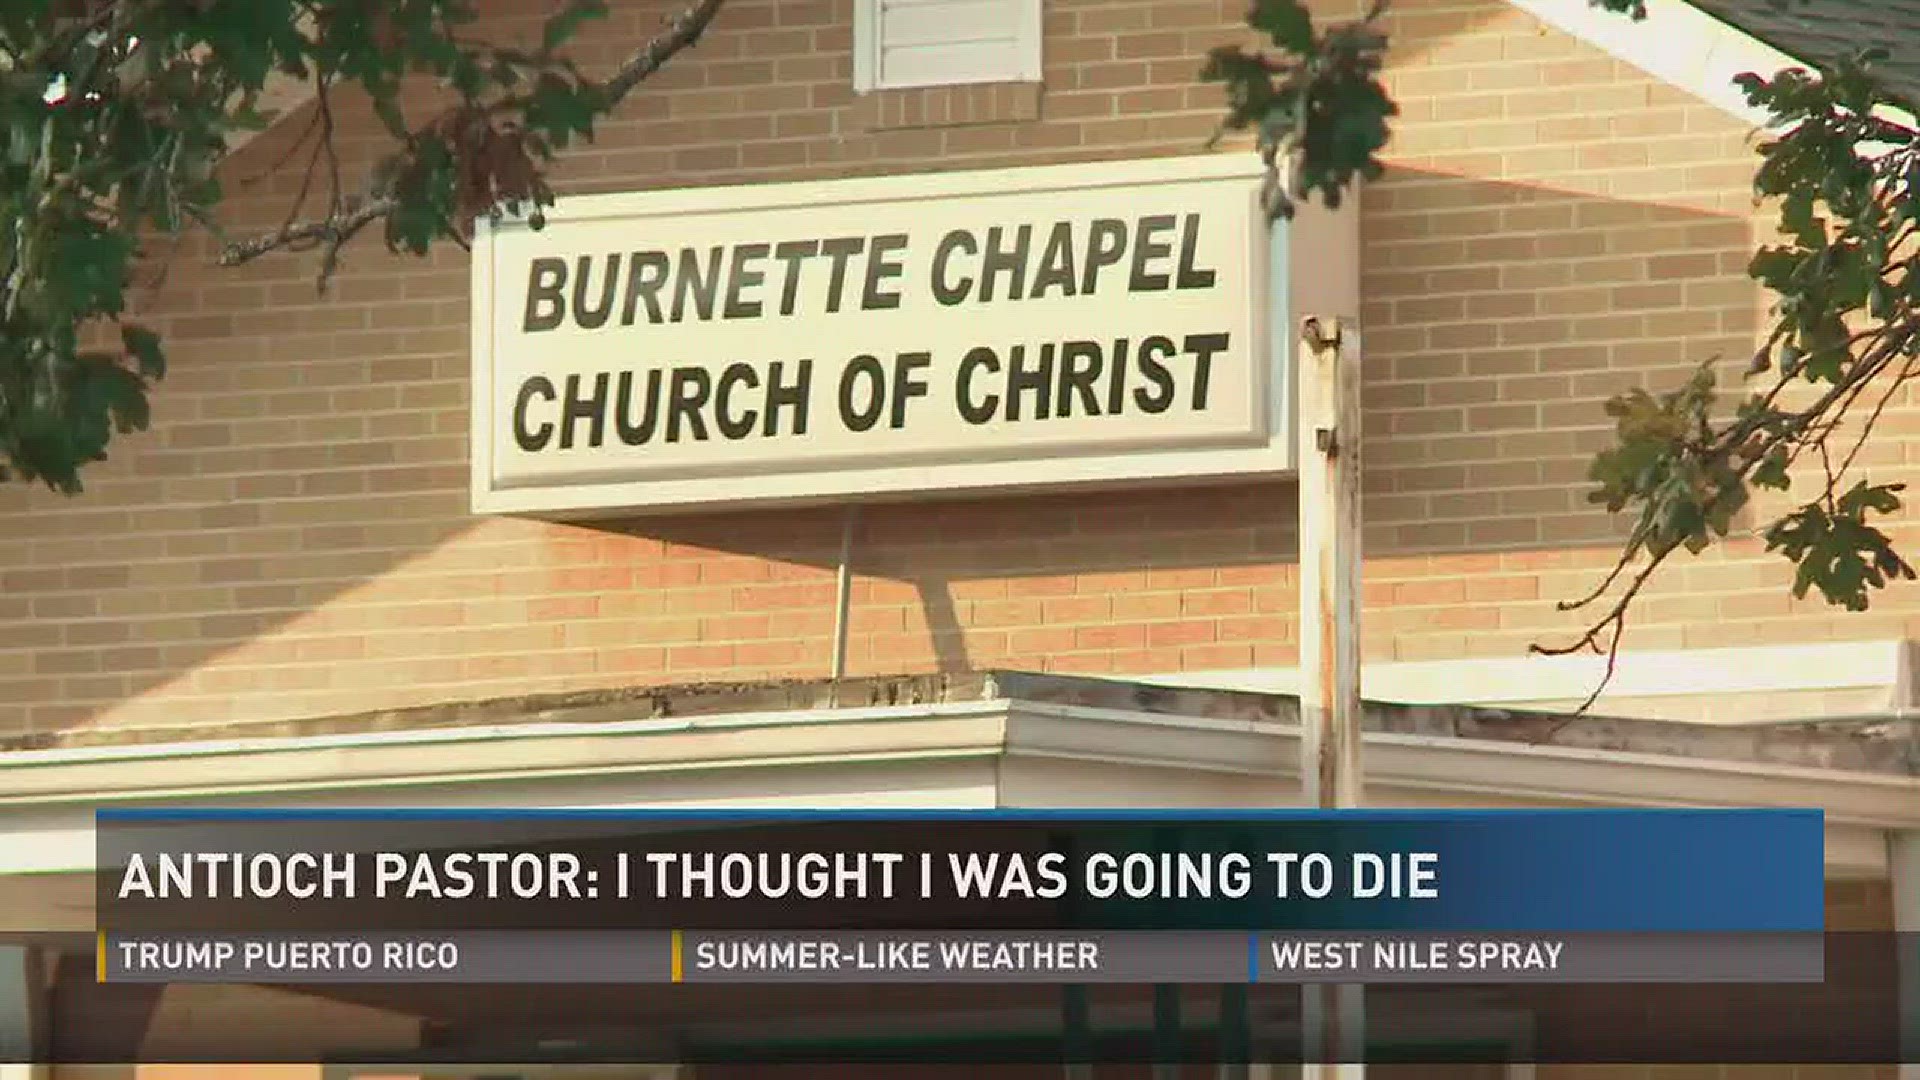 Sept. 26, 2017: The minister of Burnette Chapel Church of Christ in Antioch described how he remembered the shooting at his church on Sunday.